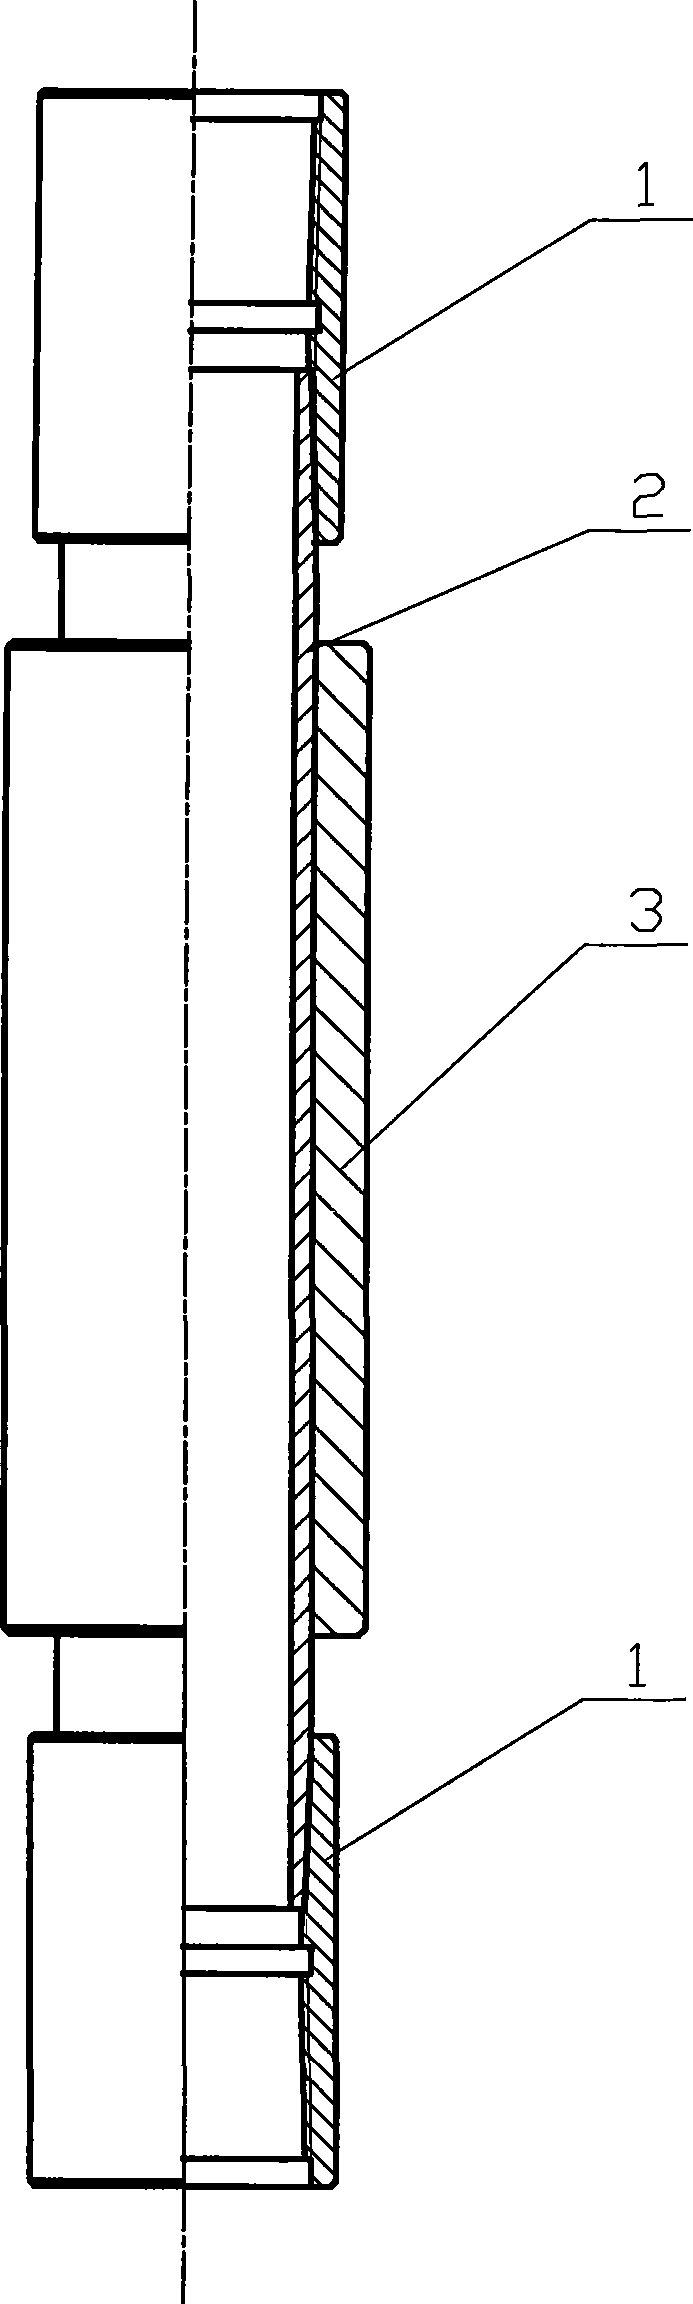 Sacrificial anode and protective cathode-oil pipe anti-corrosive apparatus